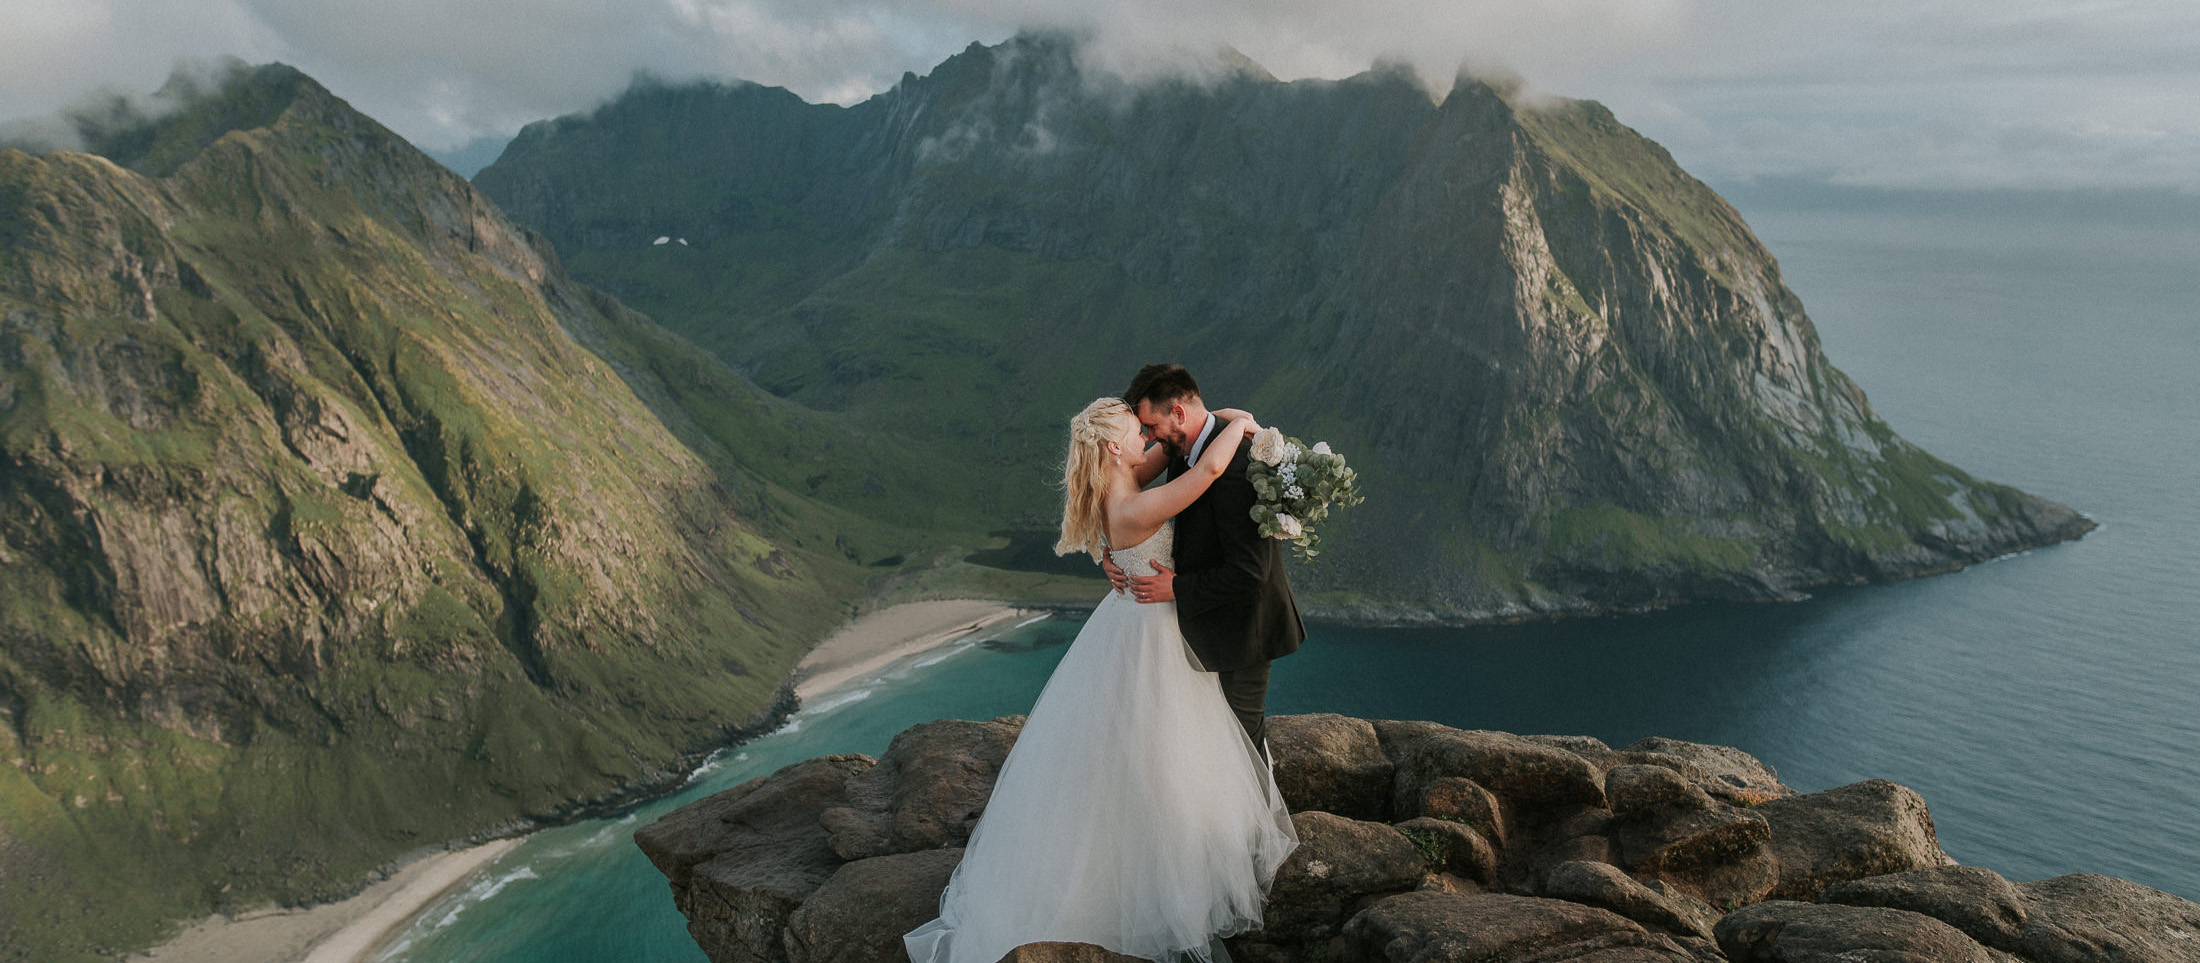 Bride and groom enjoying their adventure wedding in Lofoten - standing on the mountaintop with an epic scenery in the background